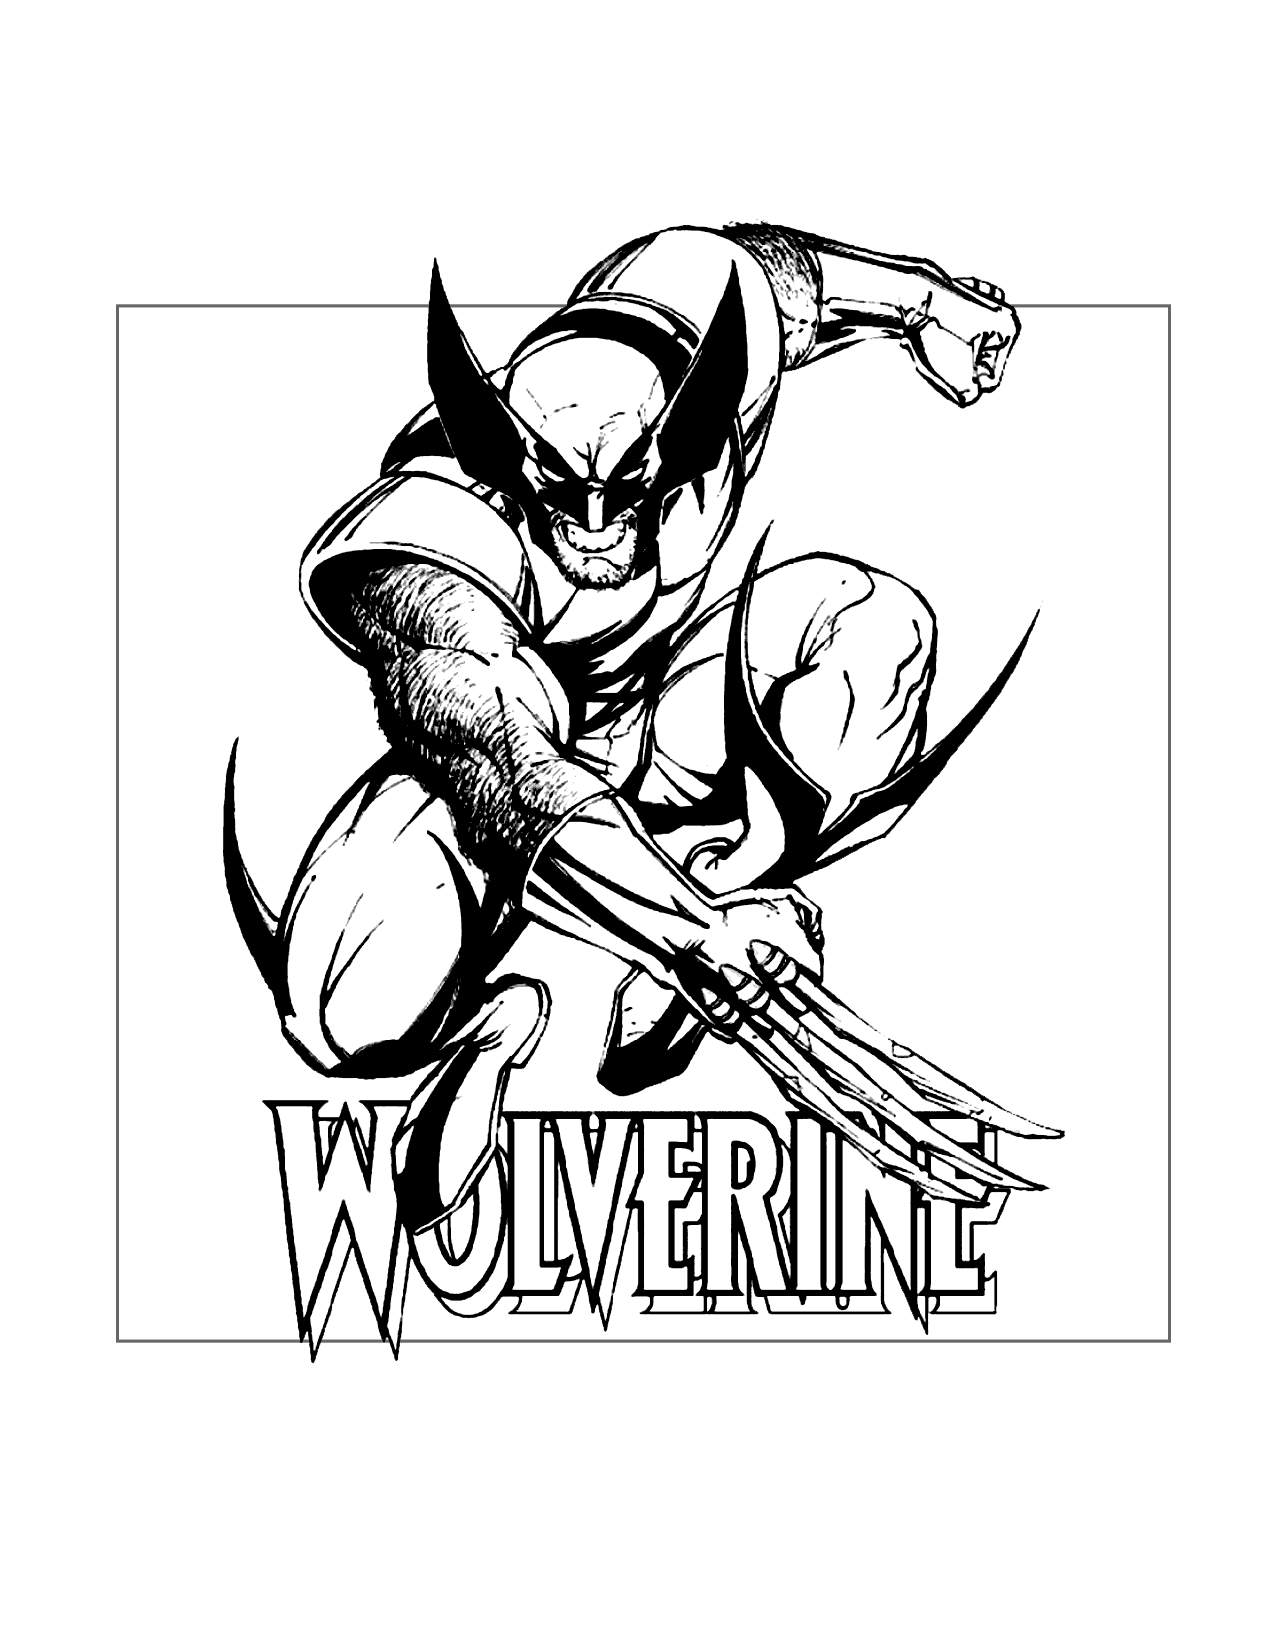 Wolverine Comic Coloring Page